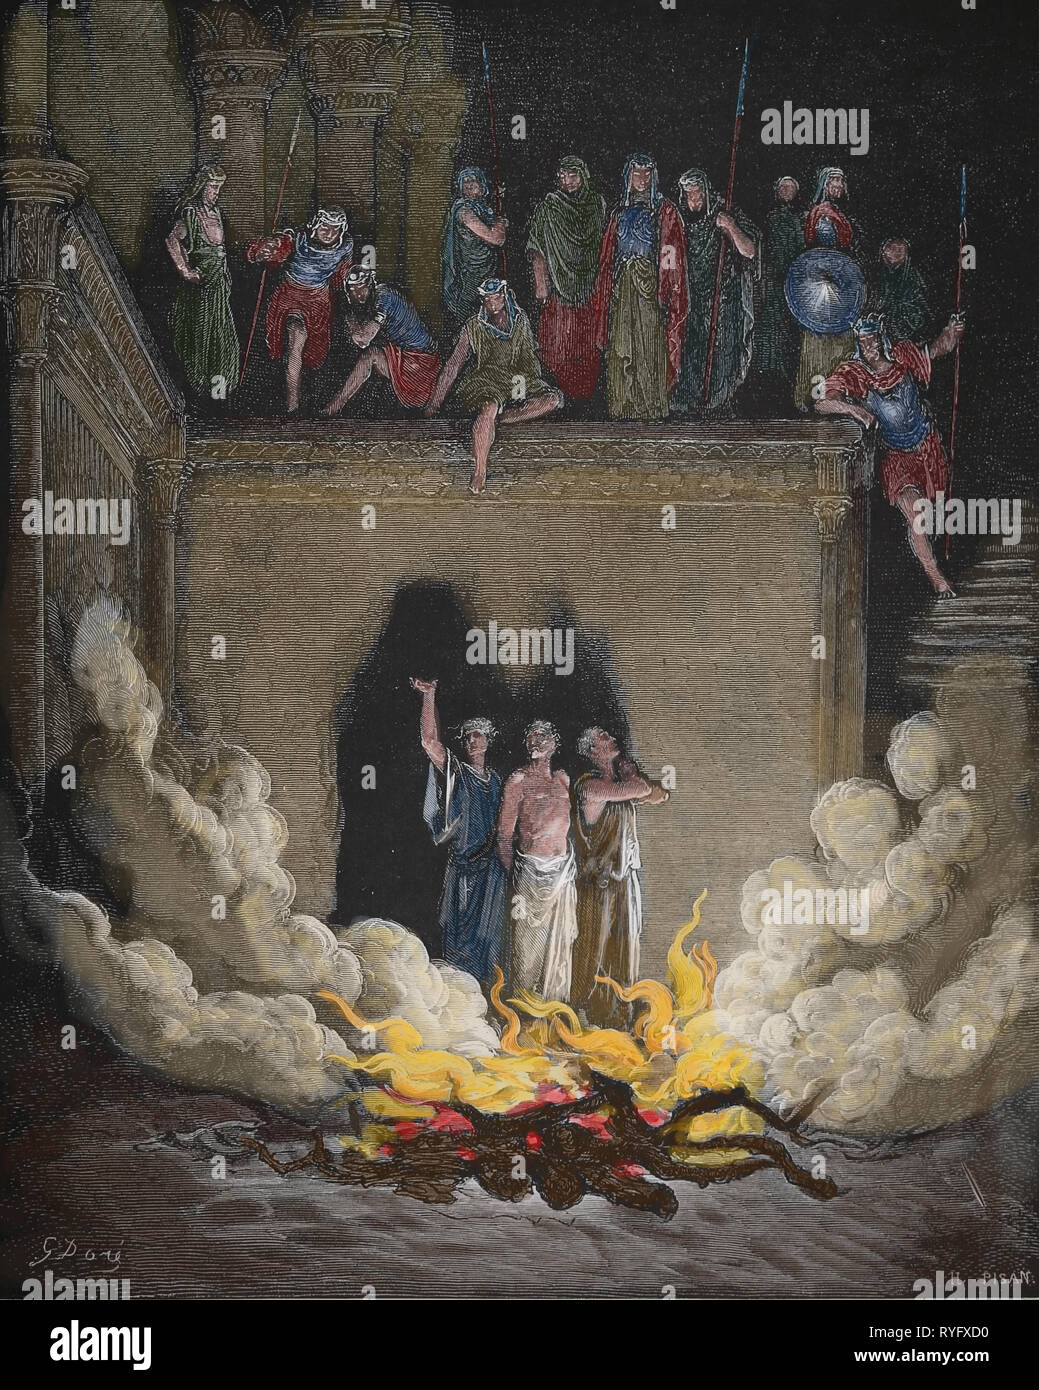 The Bible. The Prophets. Shadrach, Meshach and Abednego in the Furnace. Engraving by  Gustave Dore, 1866. Stock Photo